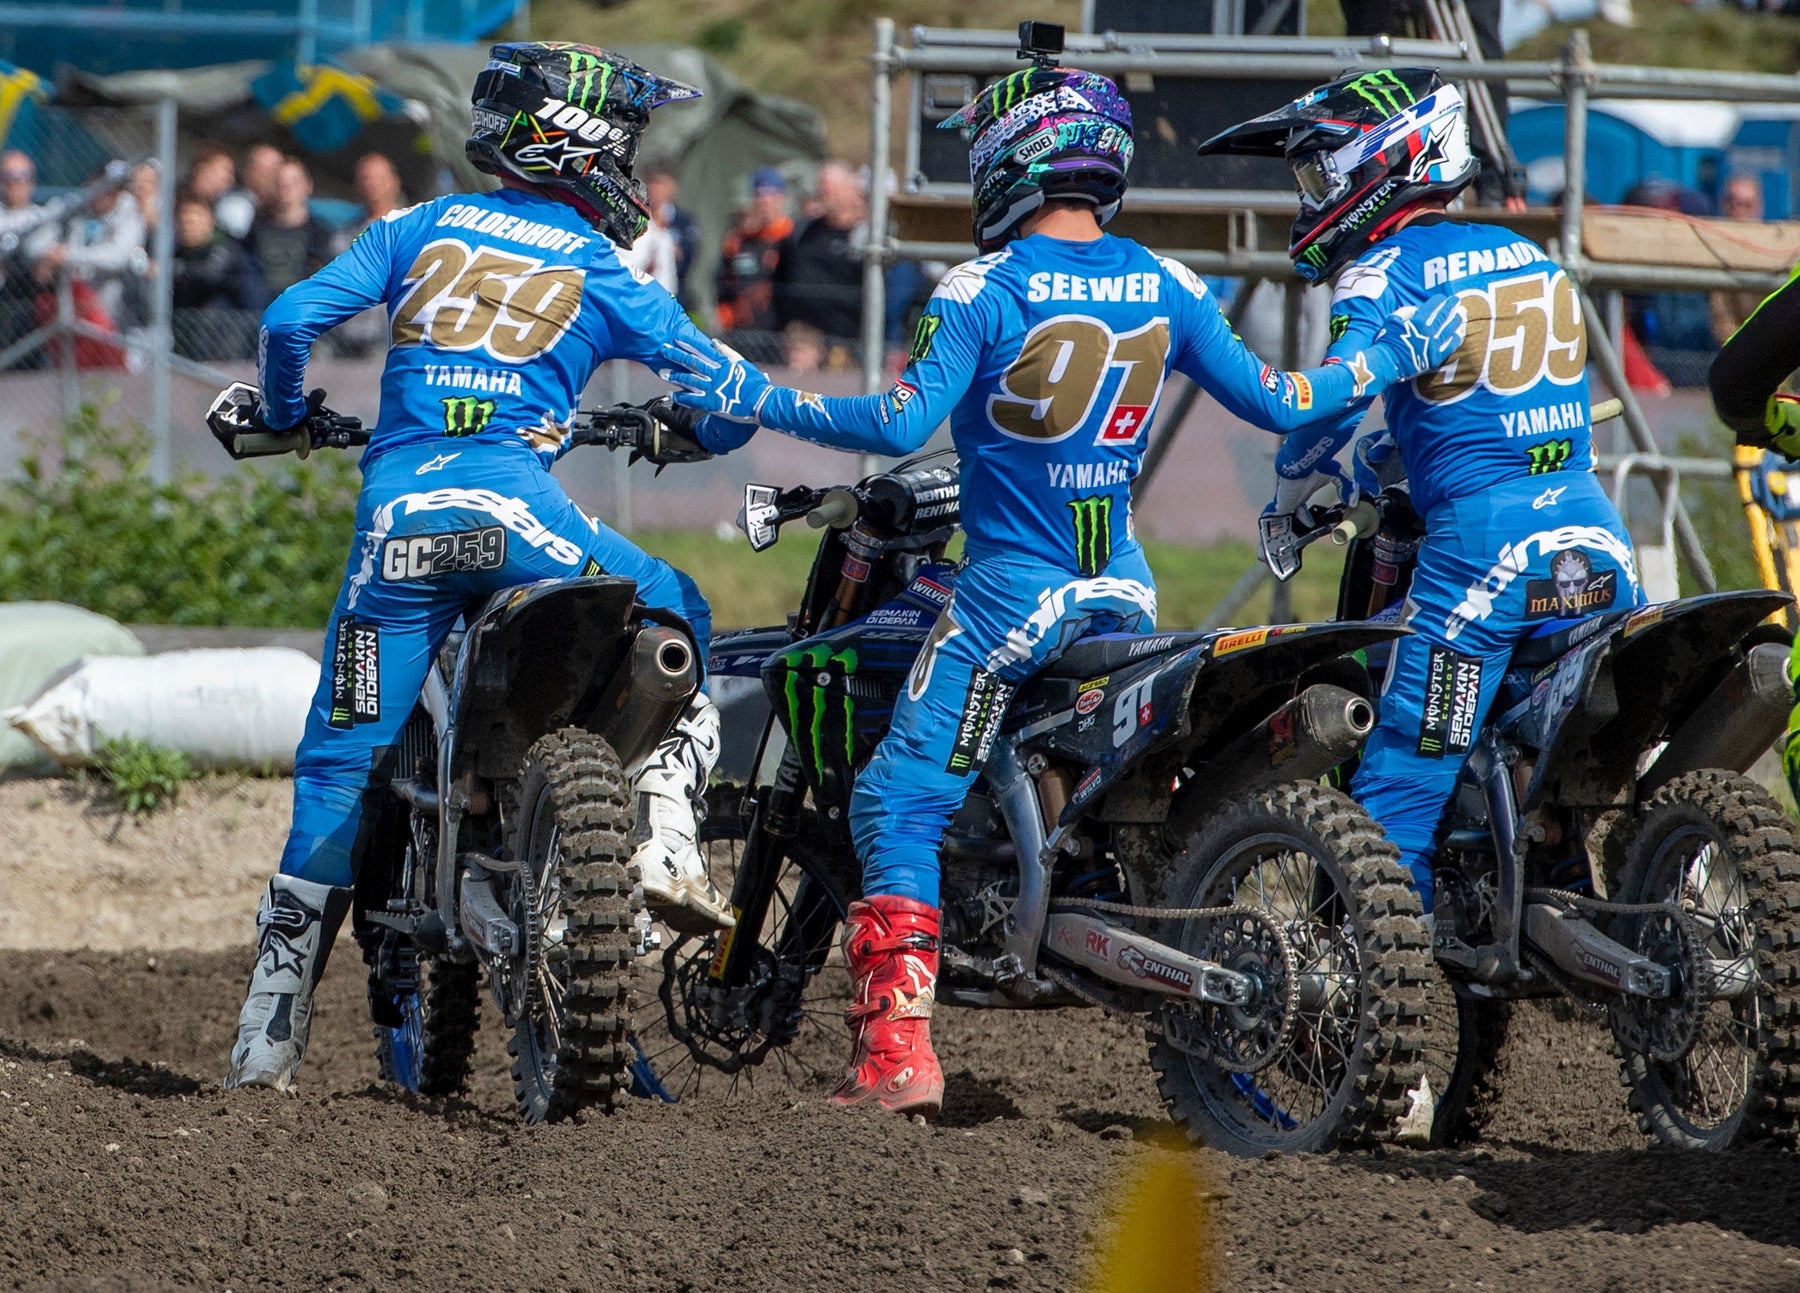 ALPINESTARS SWEEP MXGP PODIUM AS MAXIME RENAUX AND JEREMY SEEWER WIN MOTOS WHILE SEEWER ALSO TAKES THE OVERALL VICTORY WITH GLENN COLDENHOFF THIRD IN UDDEVALLA, SWEDEN